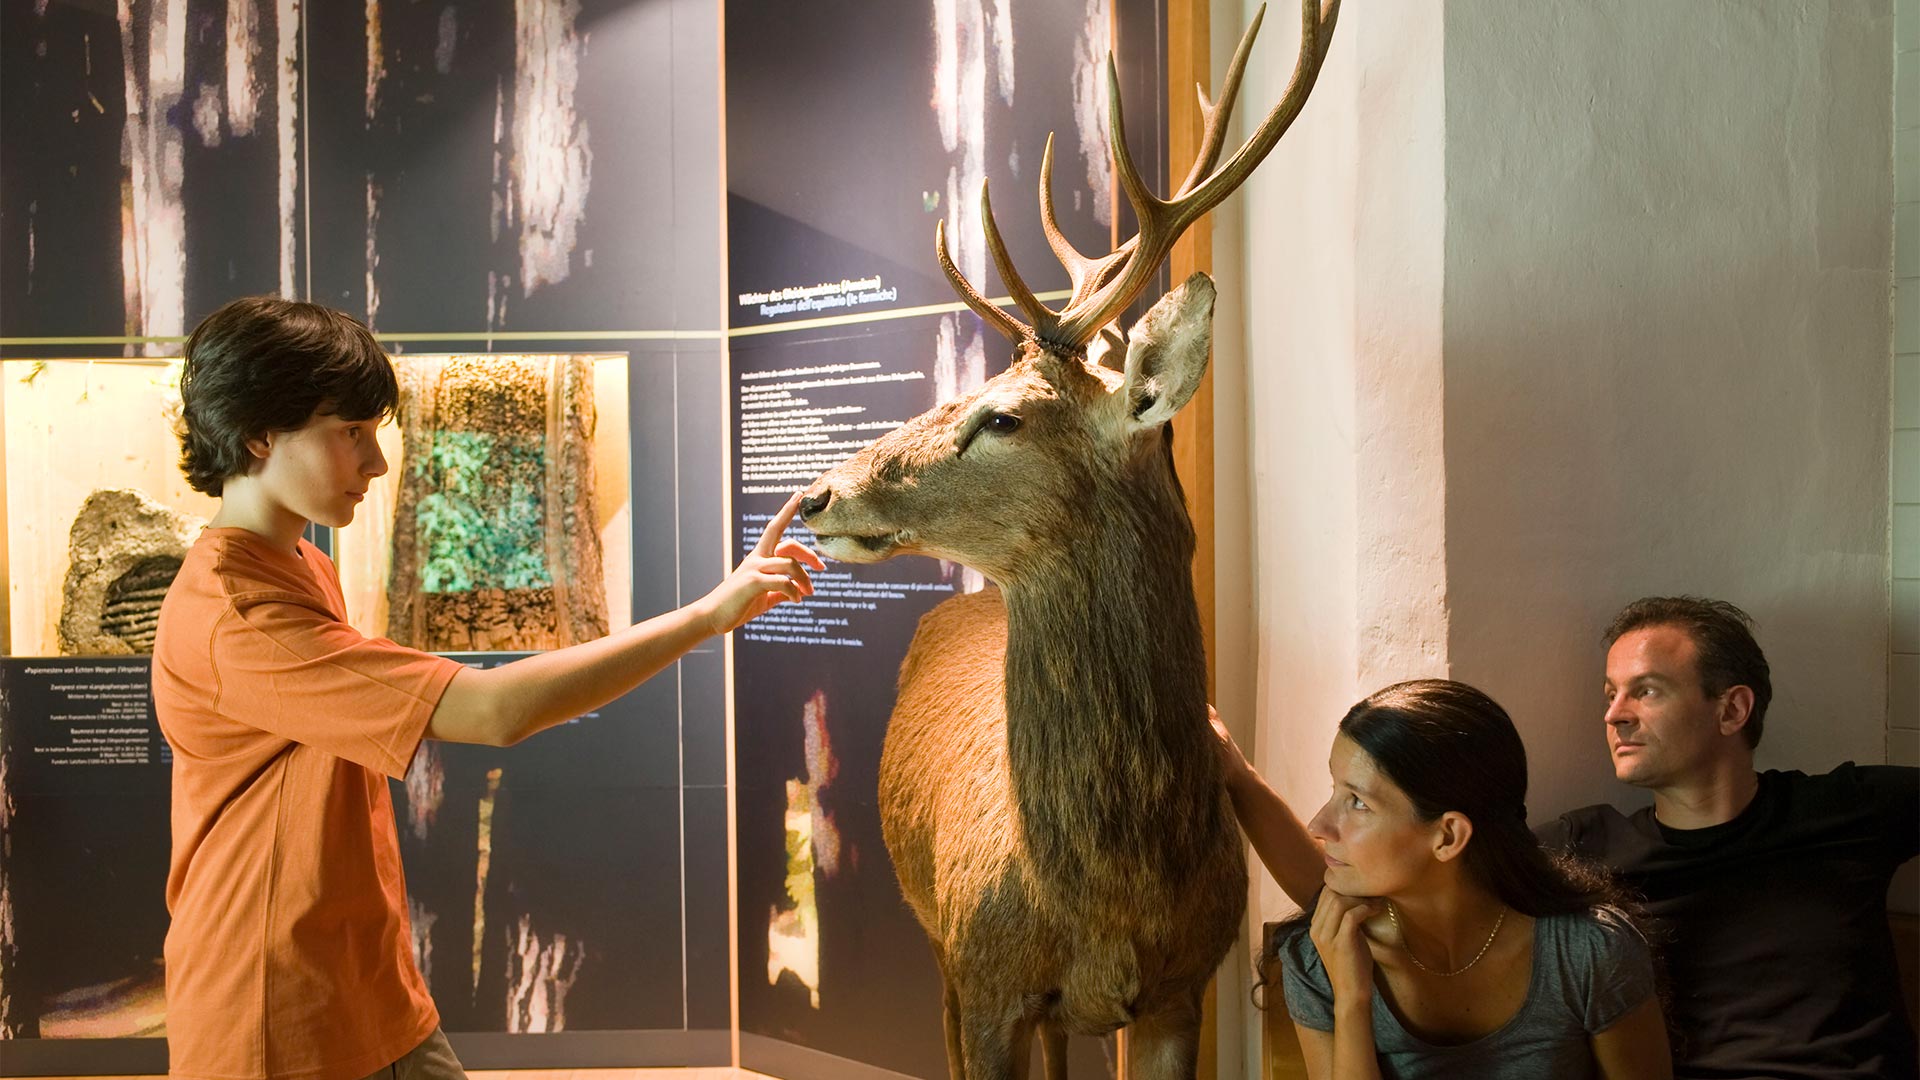 In a nature museum a boy touches the snout of a reproduction of a deer with his fingers. The parents on the right are also looking at the animal.